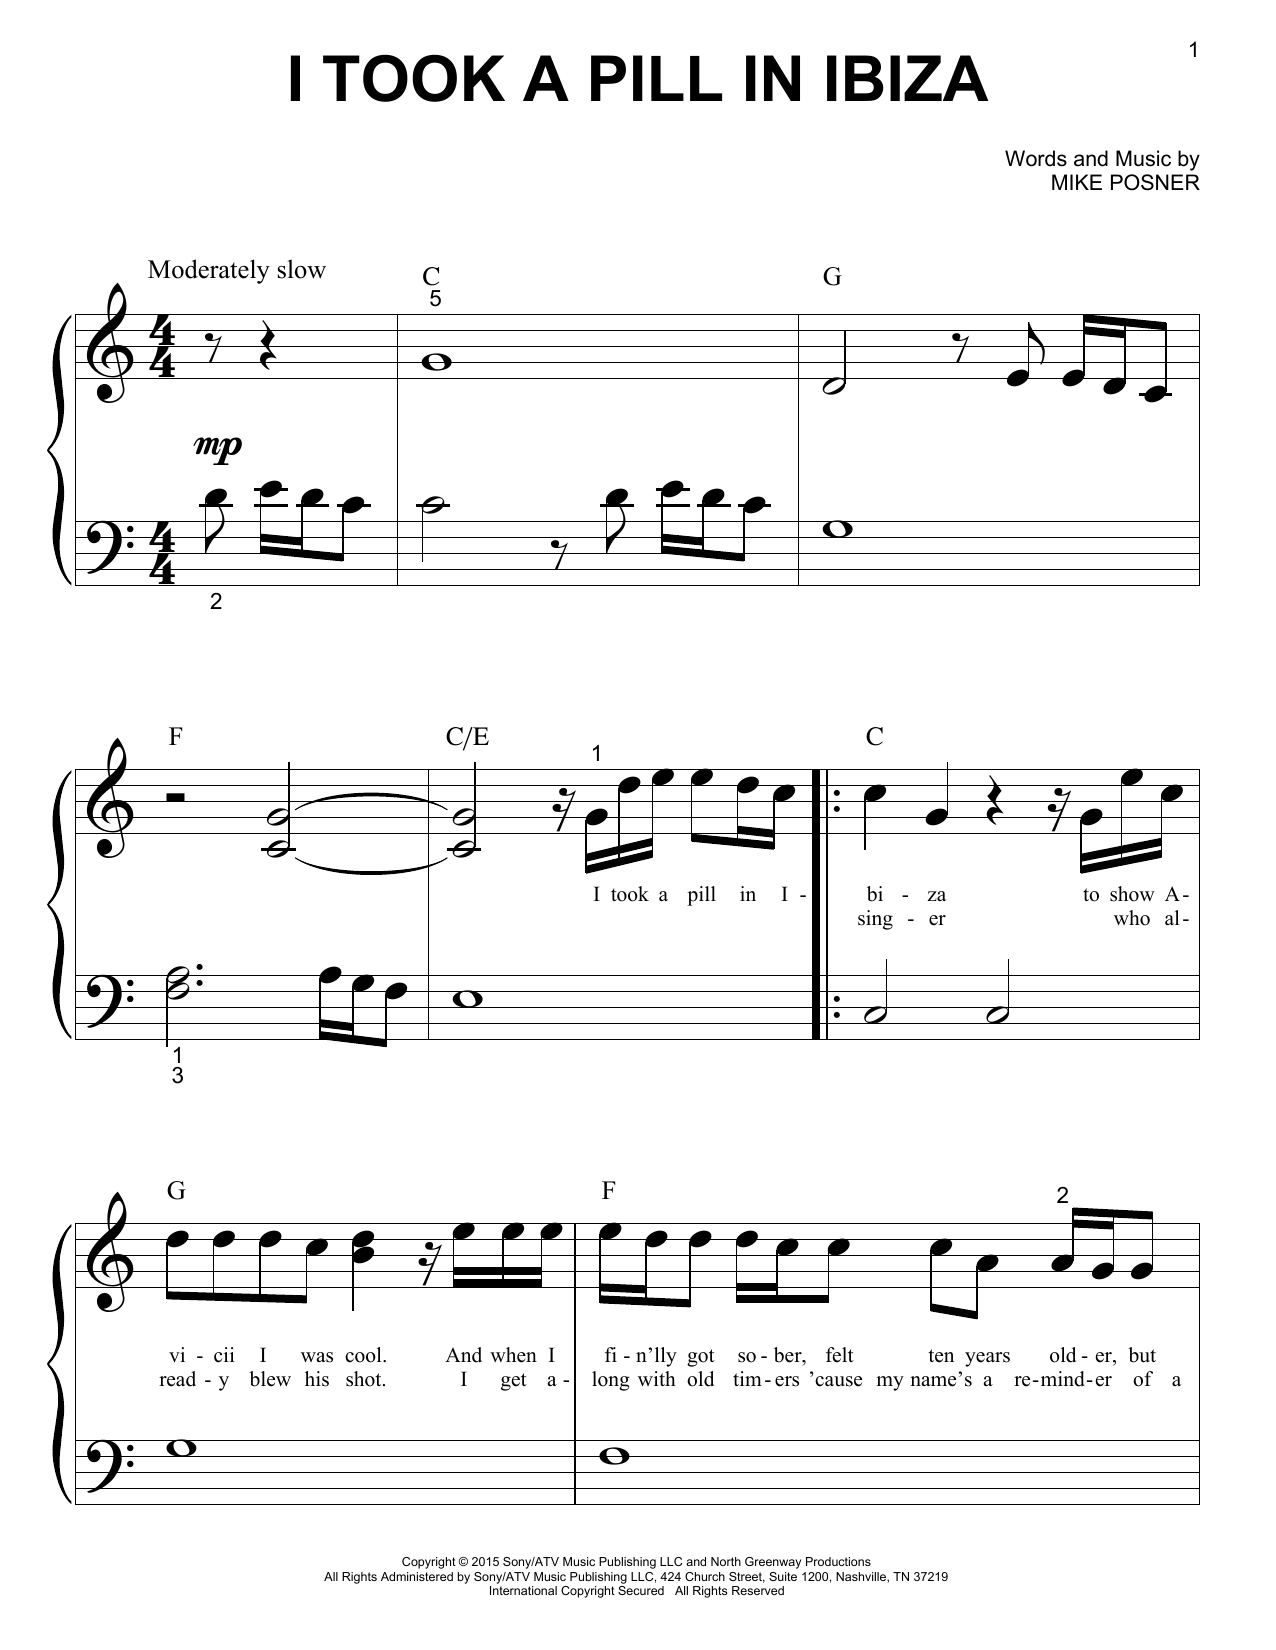 Download Mike Posner I Took A Pill In Ibiza Sheet Music